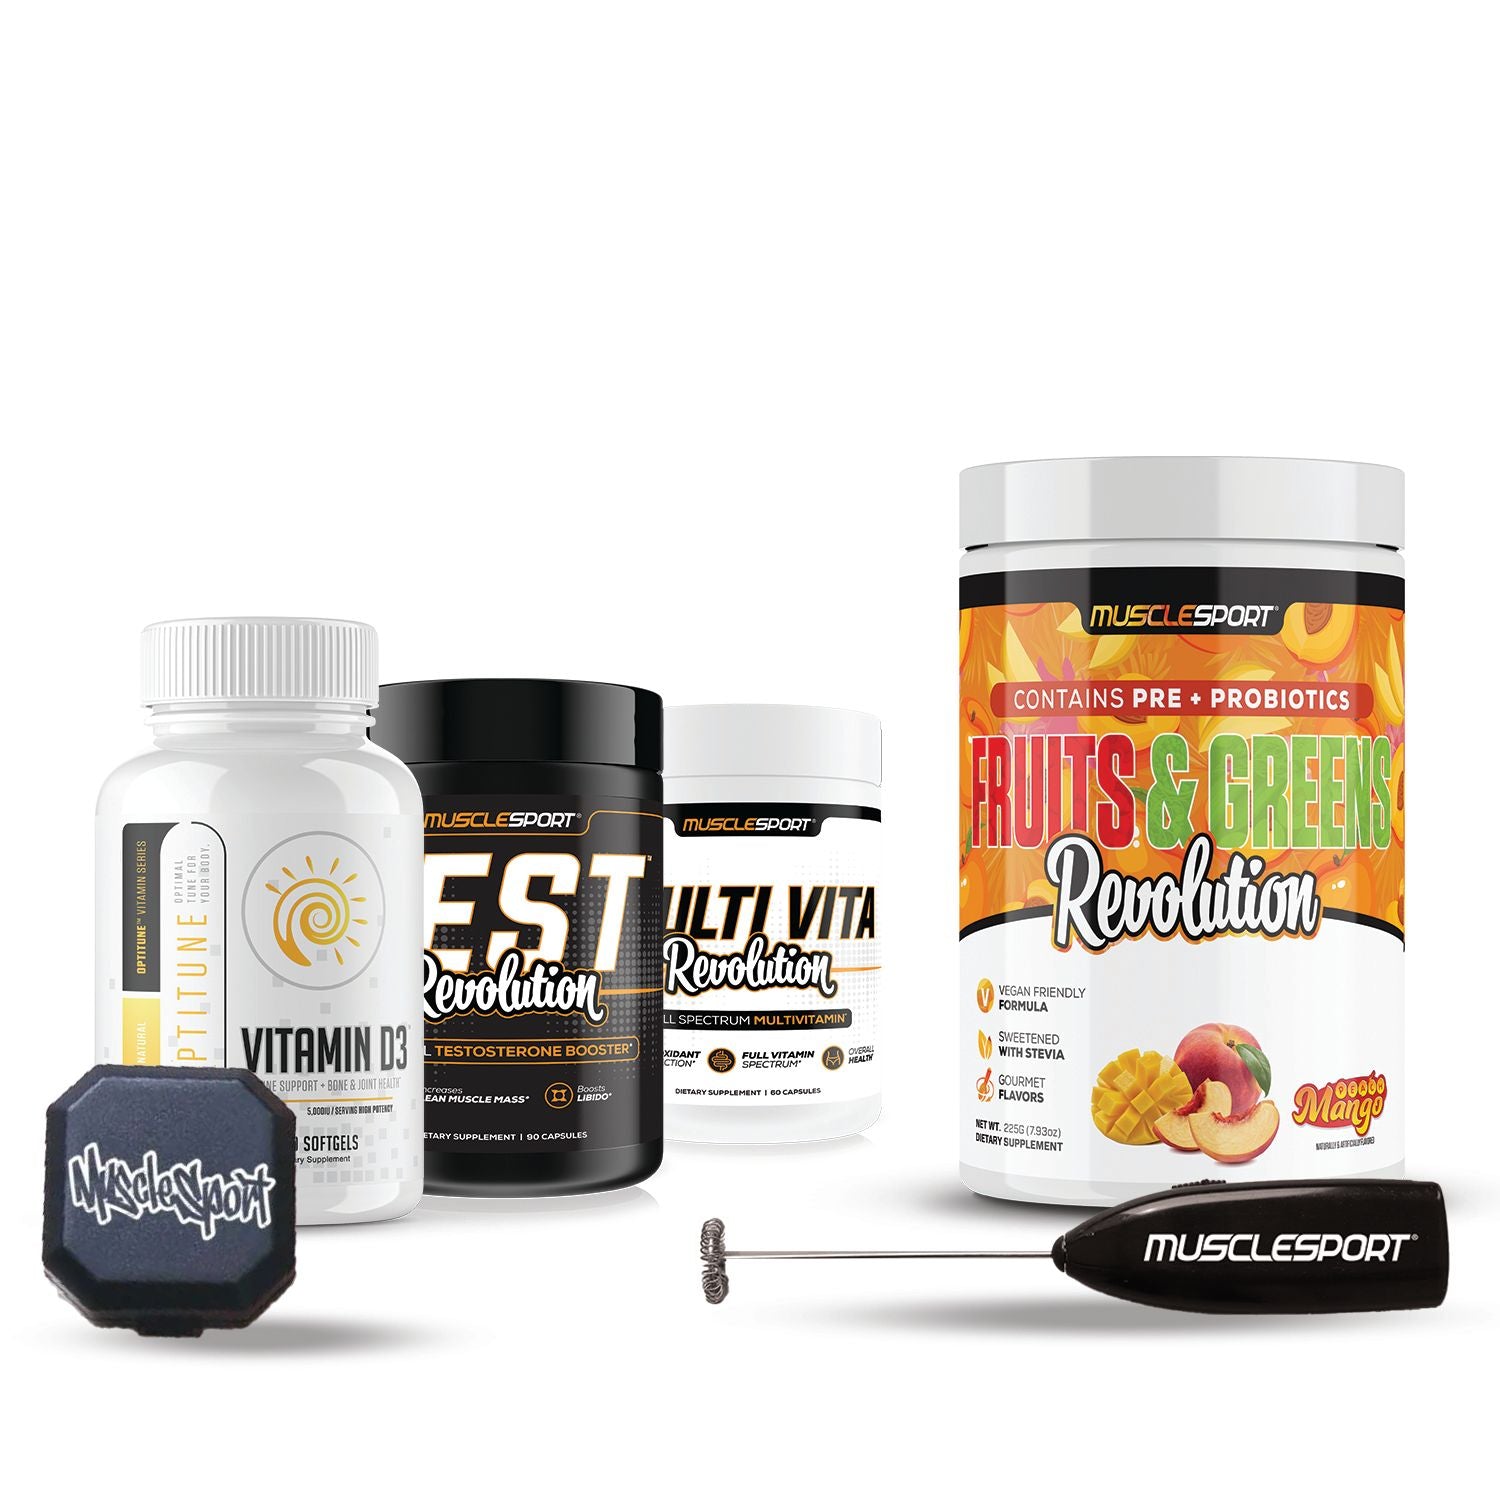 Ultimate Wellness Stack for Men 20% OFF + FREE Whisk 'N Brew Frother & Pill Box